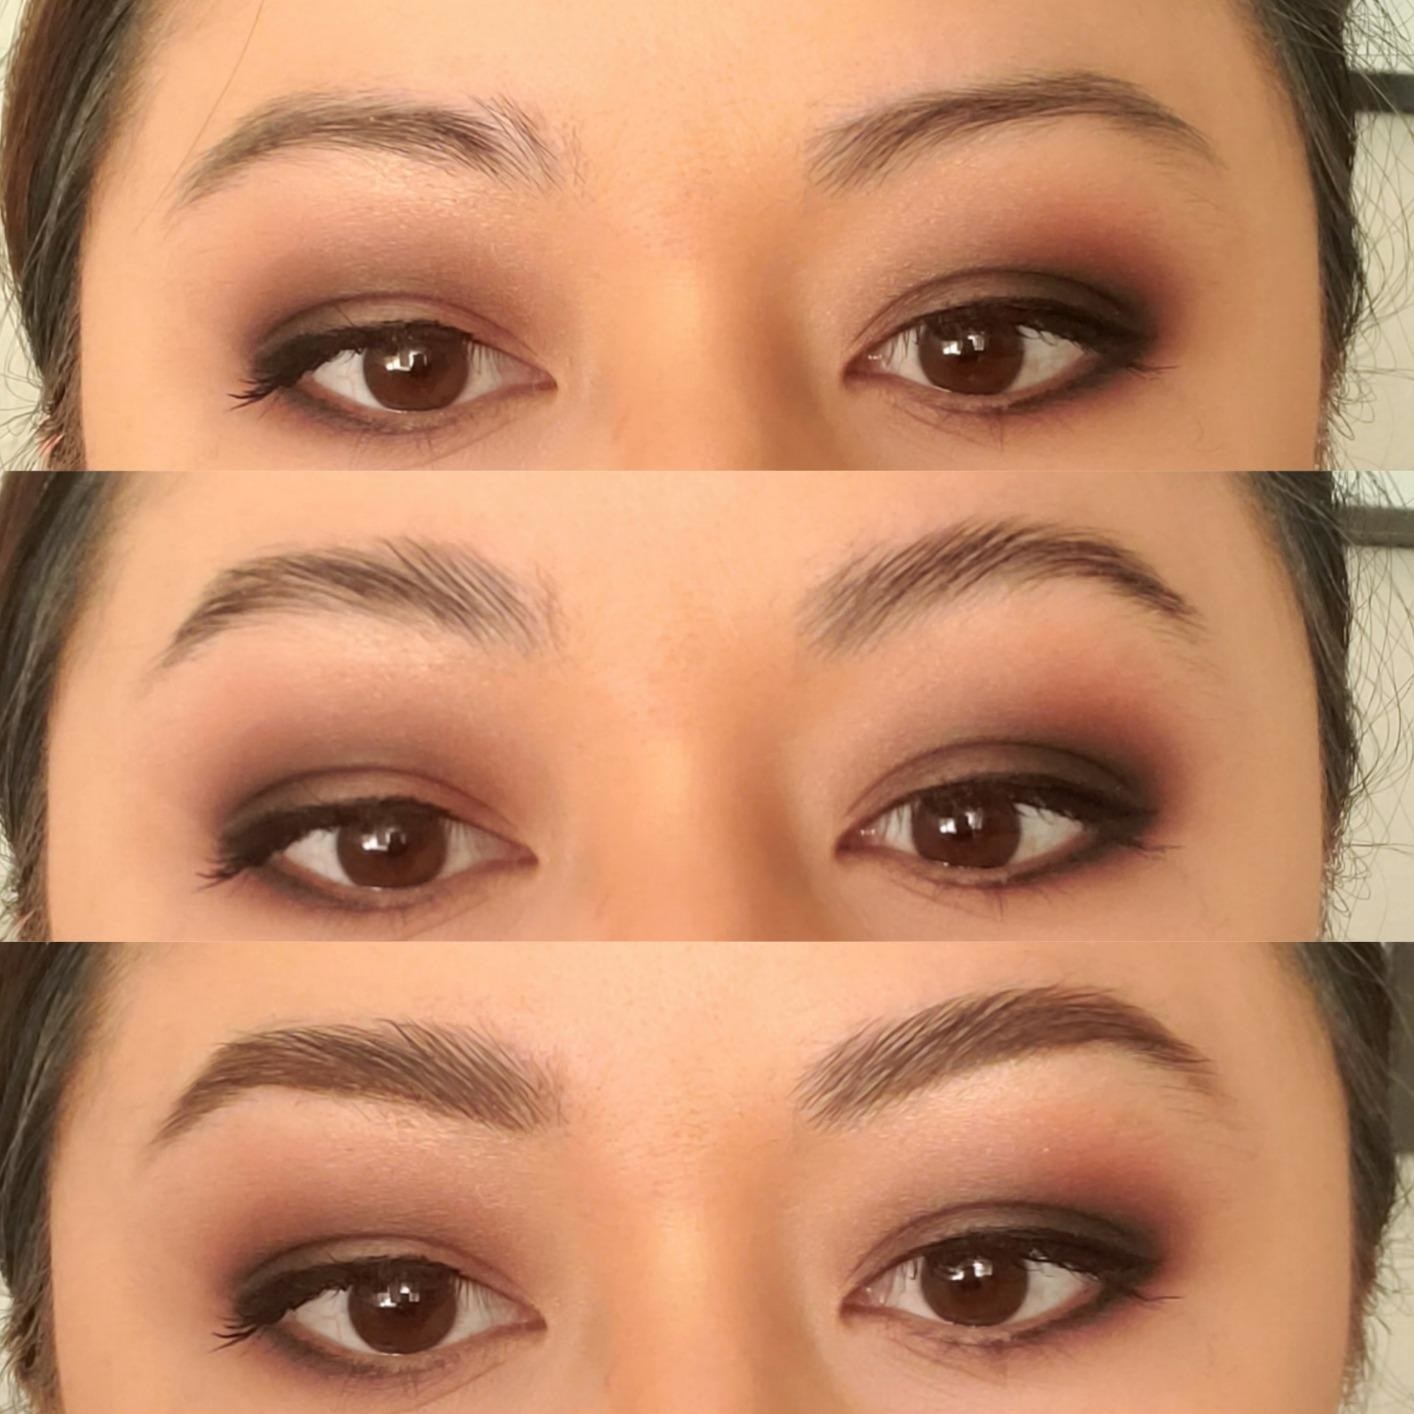 Progression photo showing reviewer&#x27;s natural brows, the brows with the soap applied, and the brows with soap and powder applied